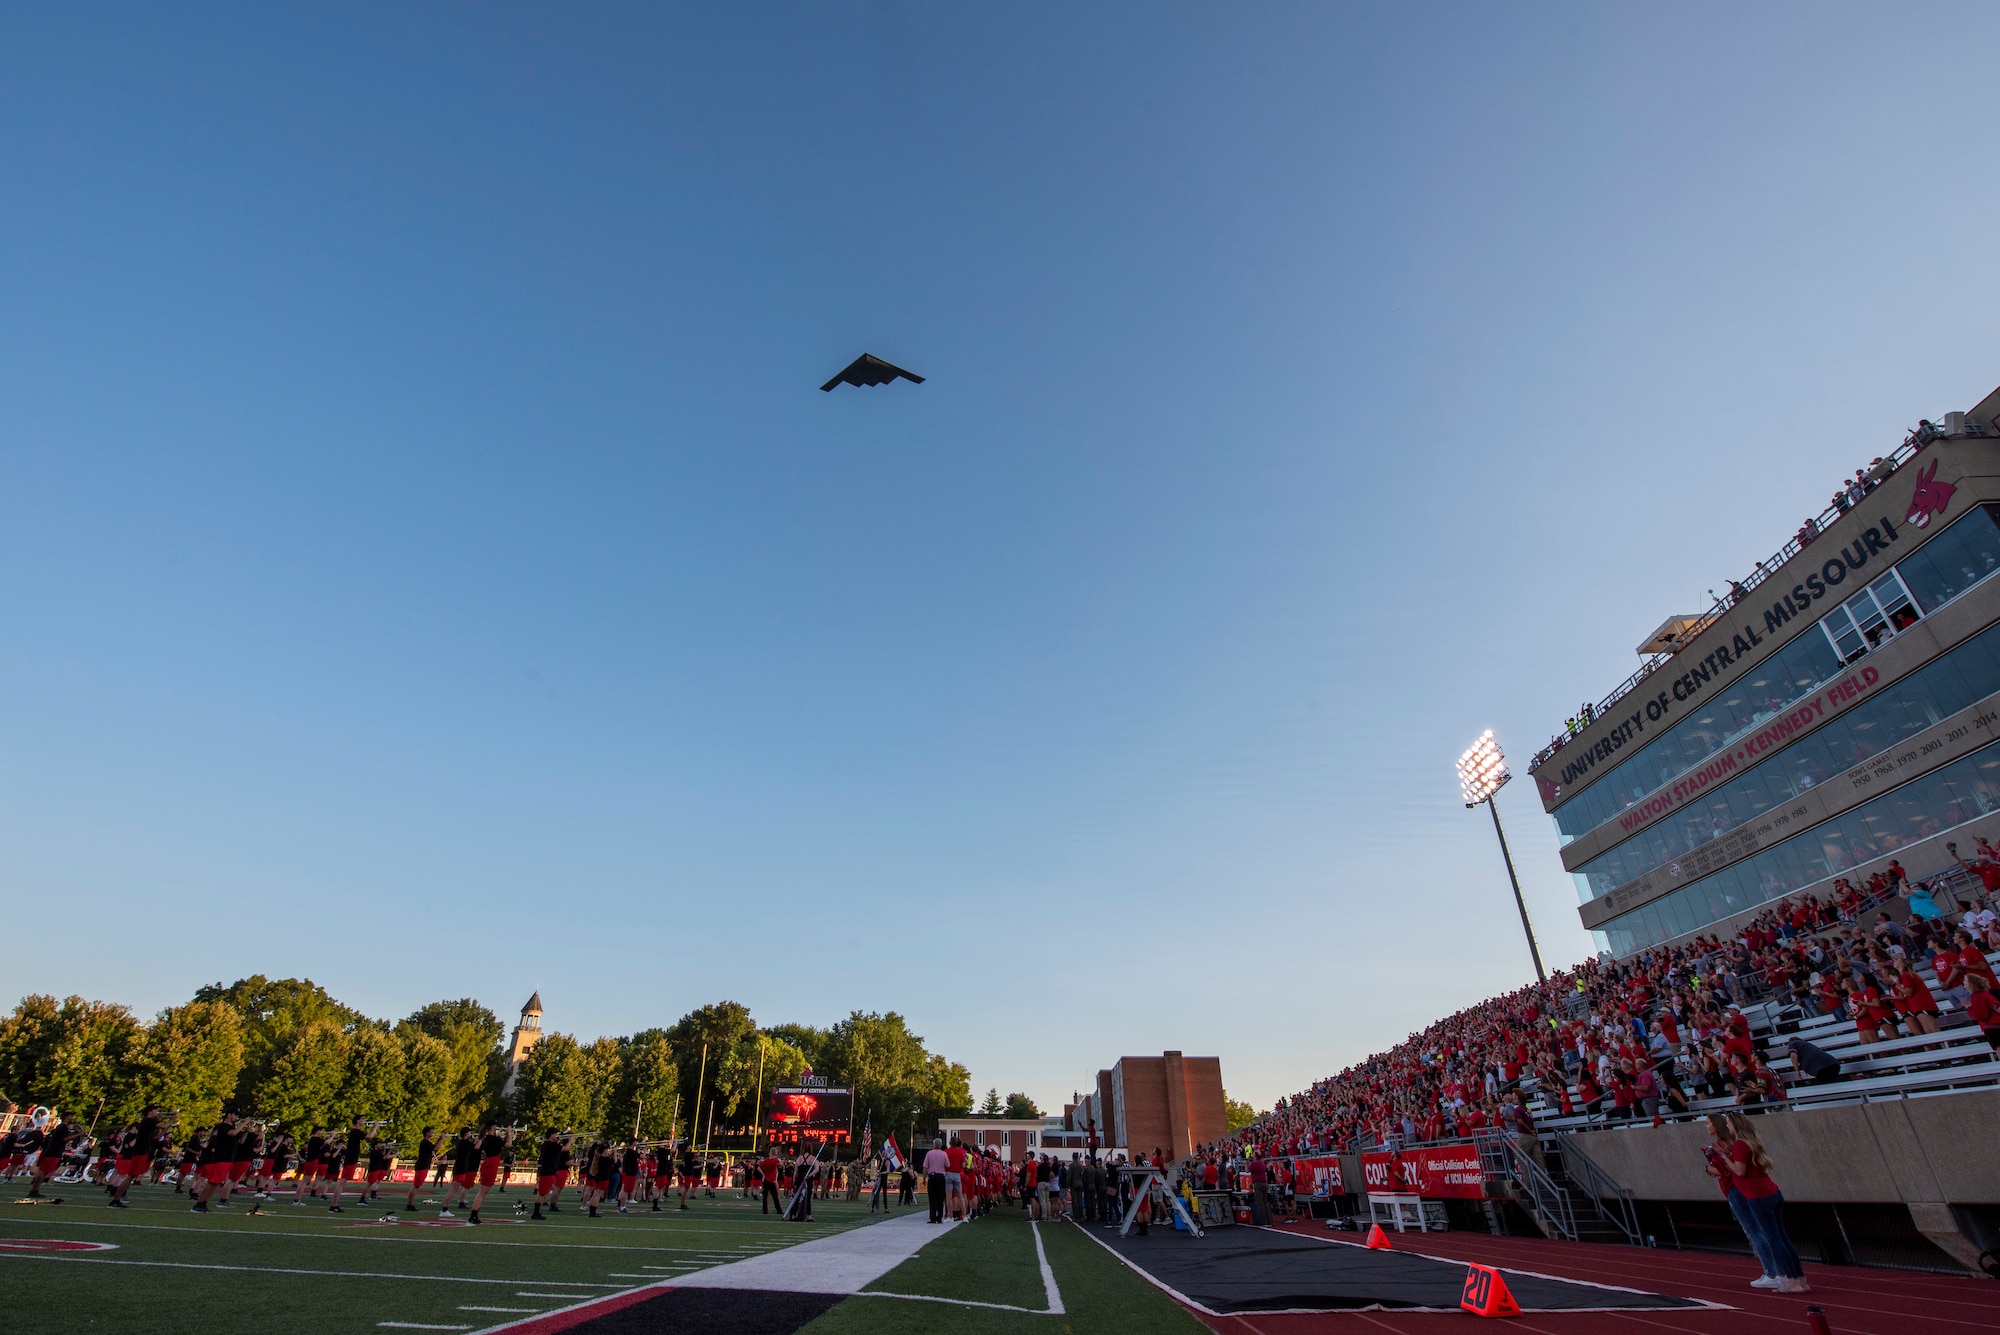 A B-2 Spirit from Whiteman Air Force Base, Missouri, performs a flyover prior to the University of Central Missouri Military Appreciation football game, Sept. 8, 2022, in Warrensburg, Missouri. Whiteman AFB and UCM share a valuable community partnership that fosters a supportive relationship between the base and local communities. (U.S. Air Force photo by Tech. Sgt. Dylan Nuckolls)